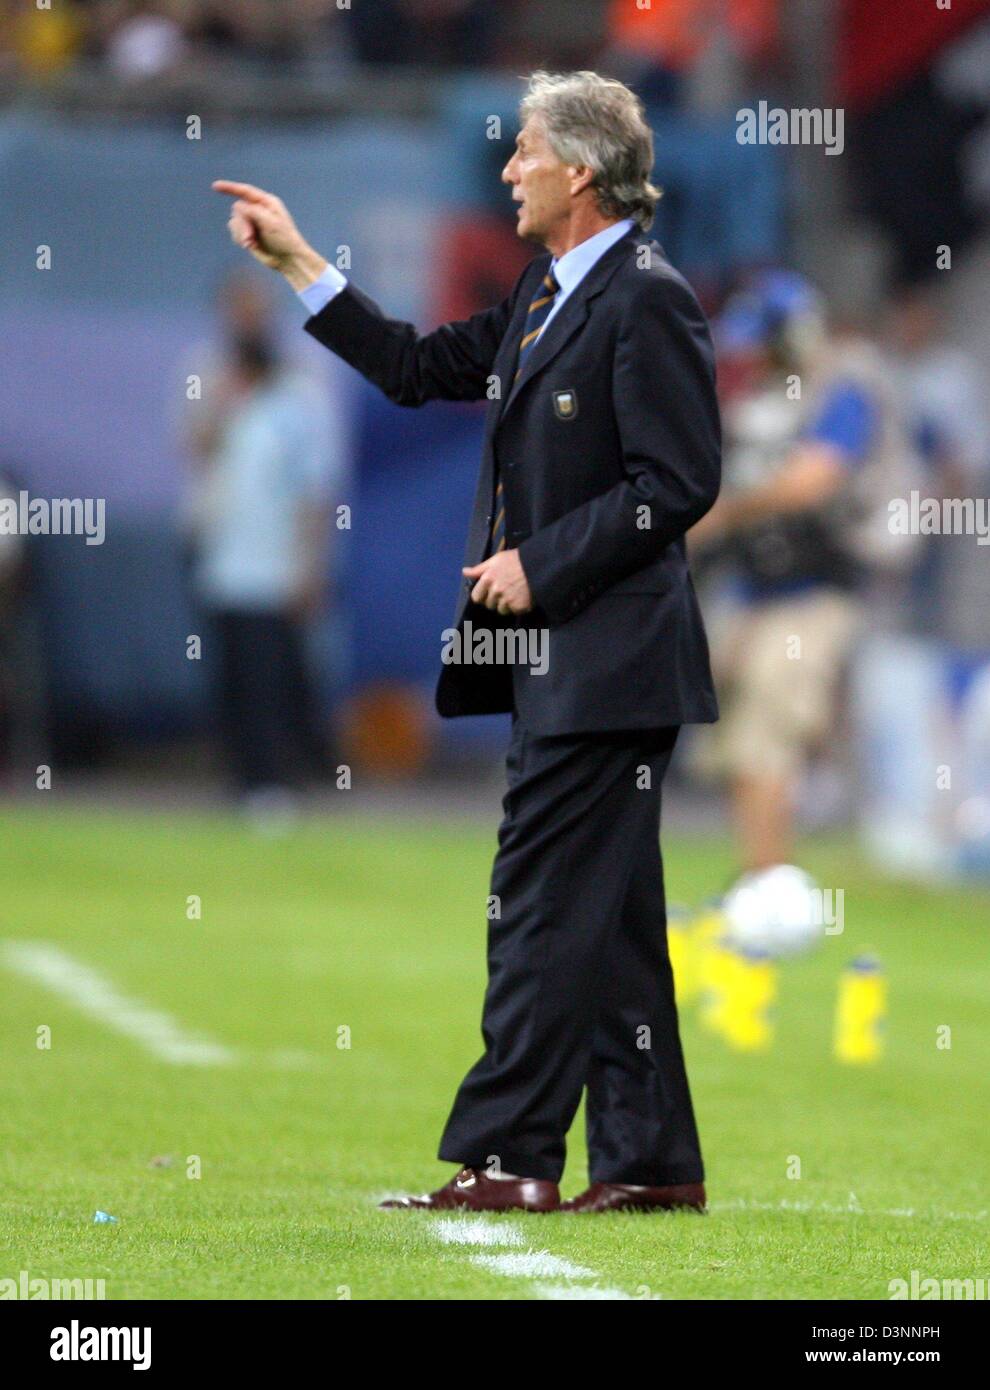 Argentinian coach Jose Pekerman gestures during the group C preliminary match of 2006 FIFA World Cup between Argentina and the Ivory Coast in Hamburg, on Saturday, 10 June 2006. DPA/KAY NIETFELD +++ Mobile Services OUT +++ Please also refer to FIFA's Terms and Conditions. Stock Photo